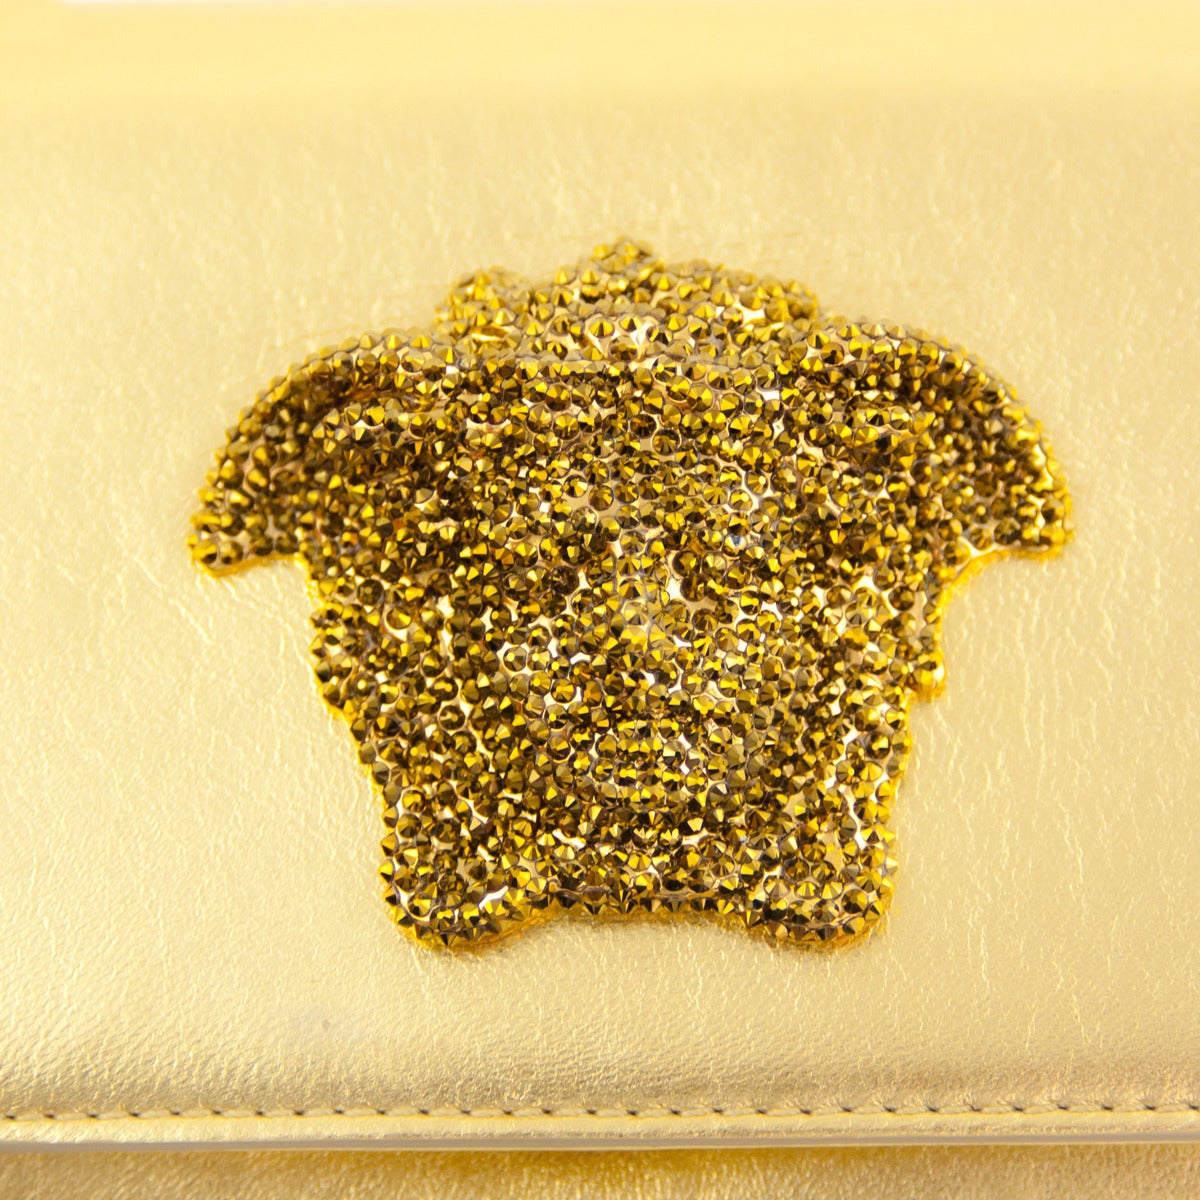 Beautiful and elegant pochette by Versace, Italy
Perfect for the evening or for an event
Gold soft leather
Amazing golden rhinestones jellyfish
Button closure
Can be carried by hand or on shoulder (golden chain)
Small inside pocket
Made in